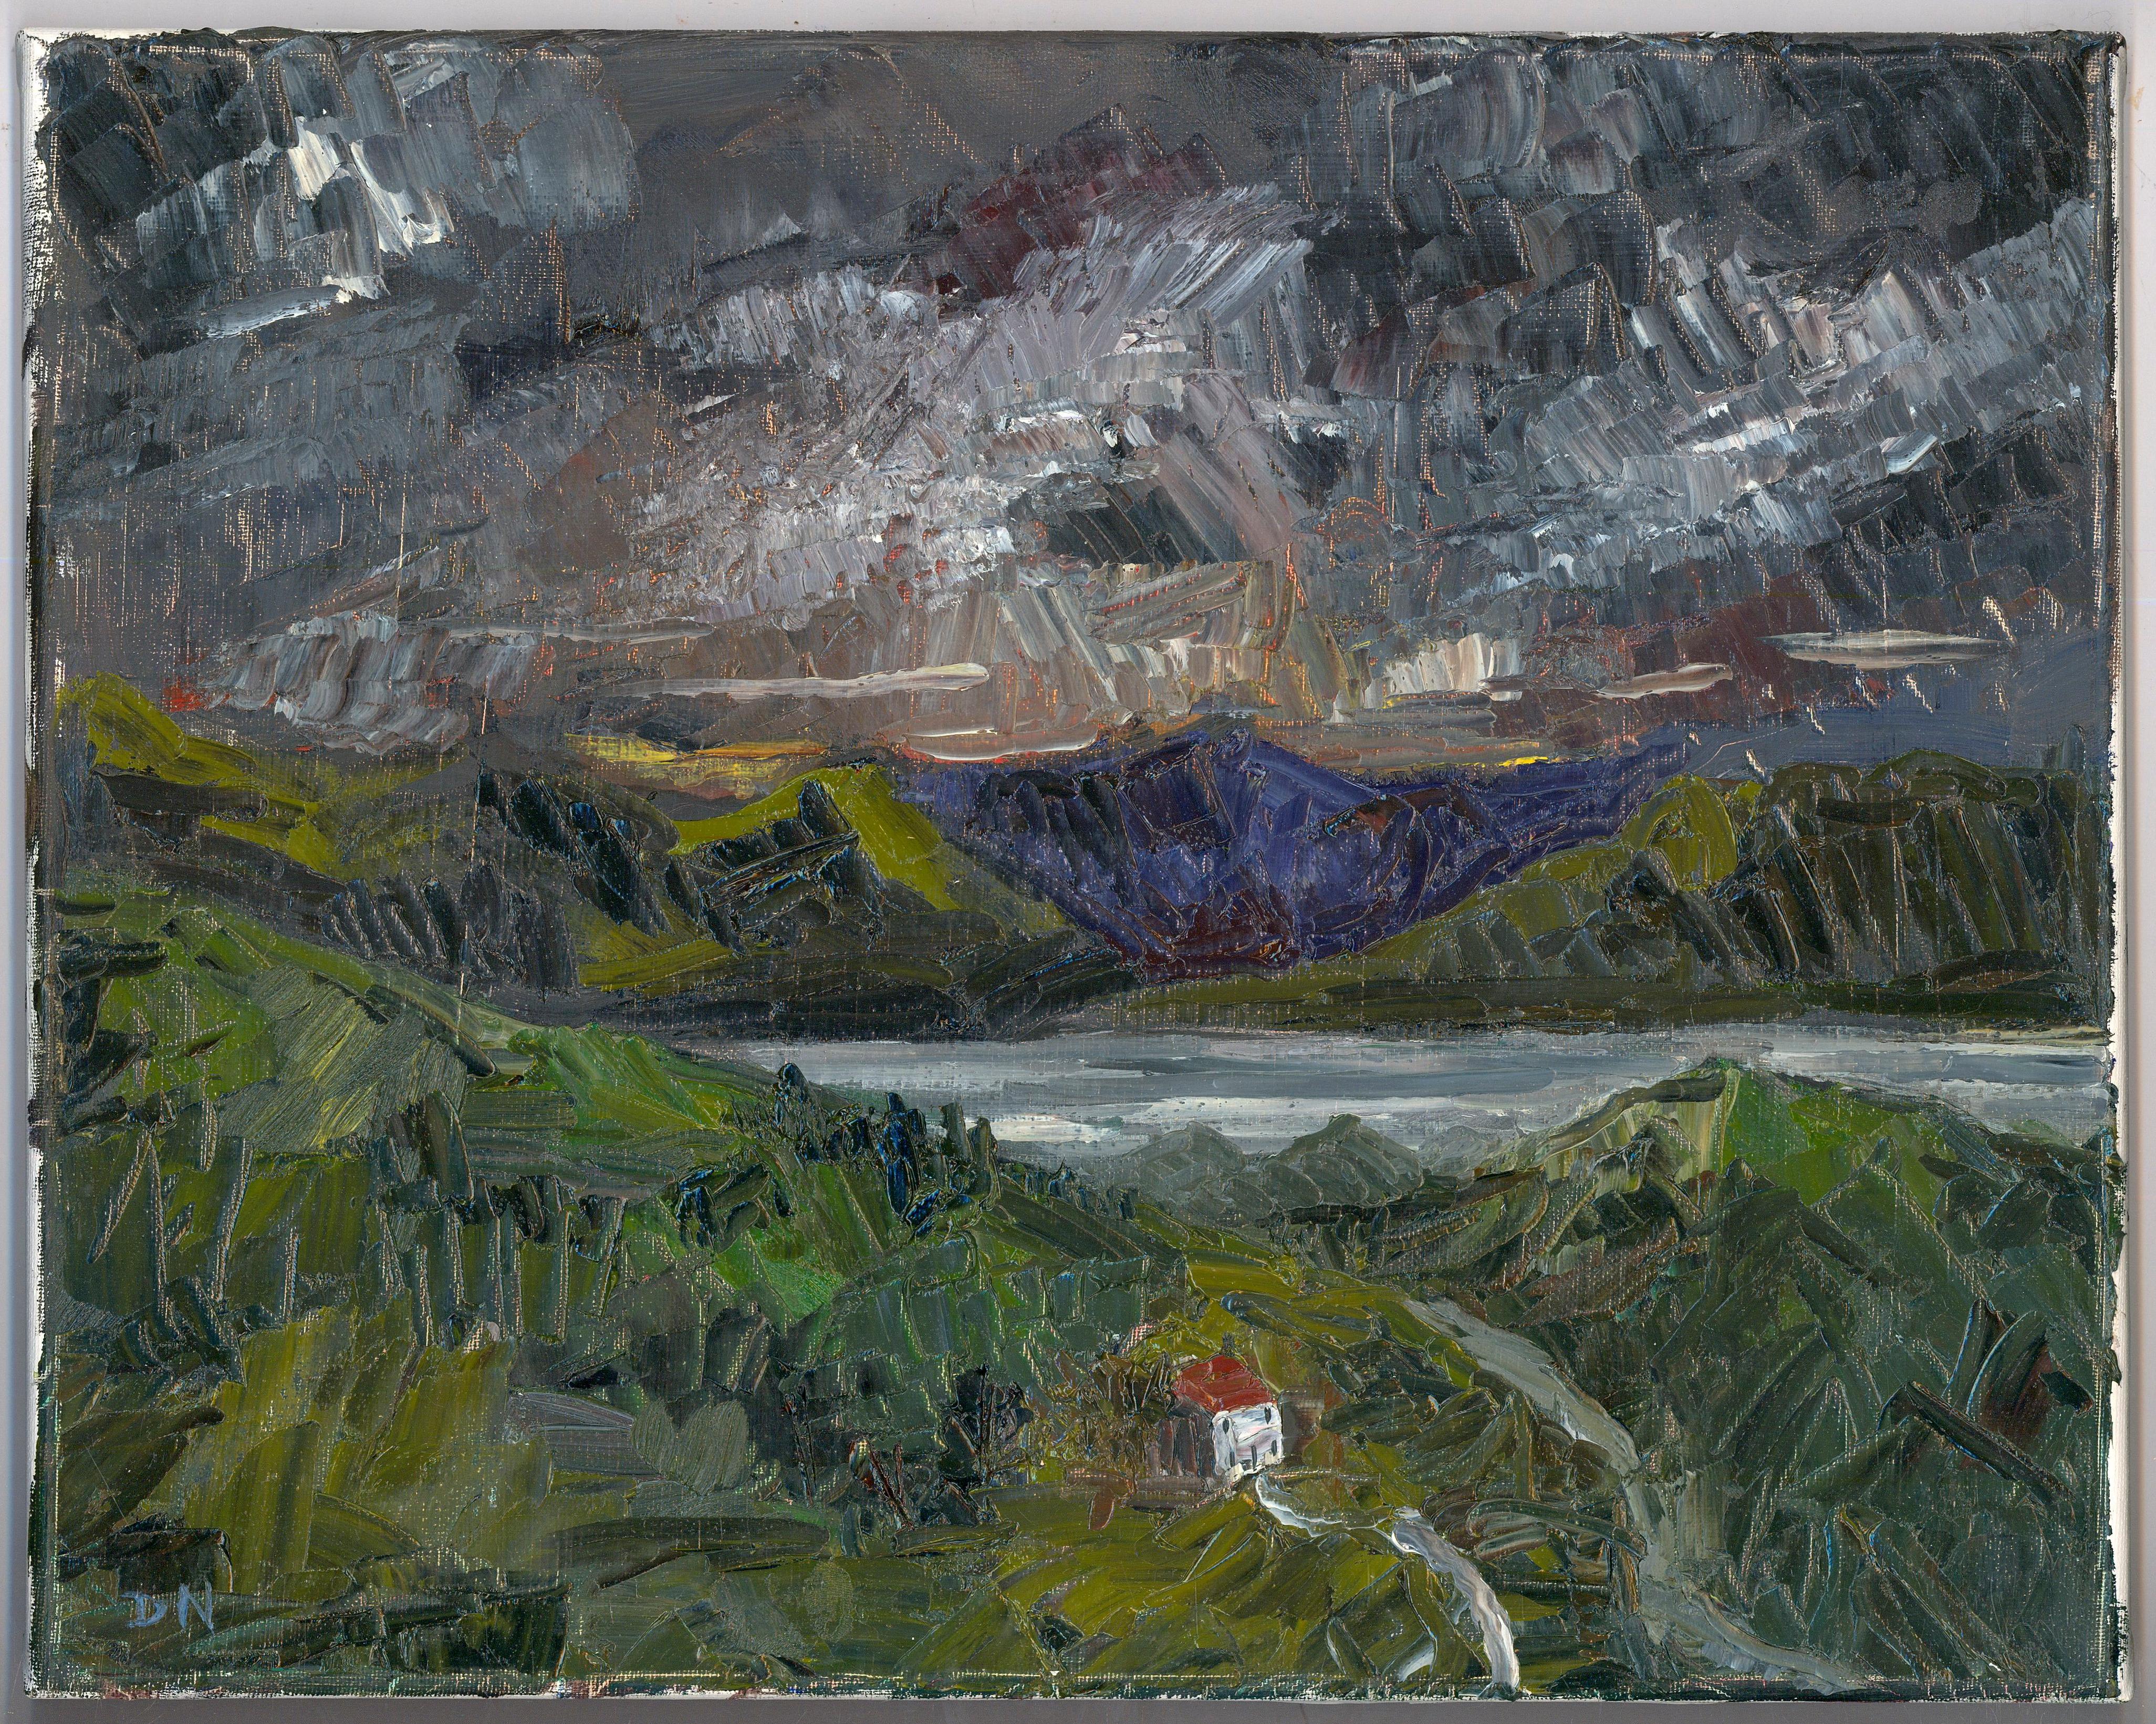 An expressive impasto scene by contemporary artist Daniel Nichols, depicting stormy skies over Loch Ness. Bring scale to this dramatic landscape, Nichols has included a charming white fronted cottage in the foothills to the front. Signed with